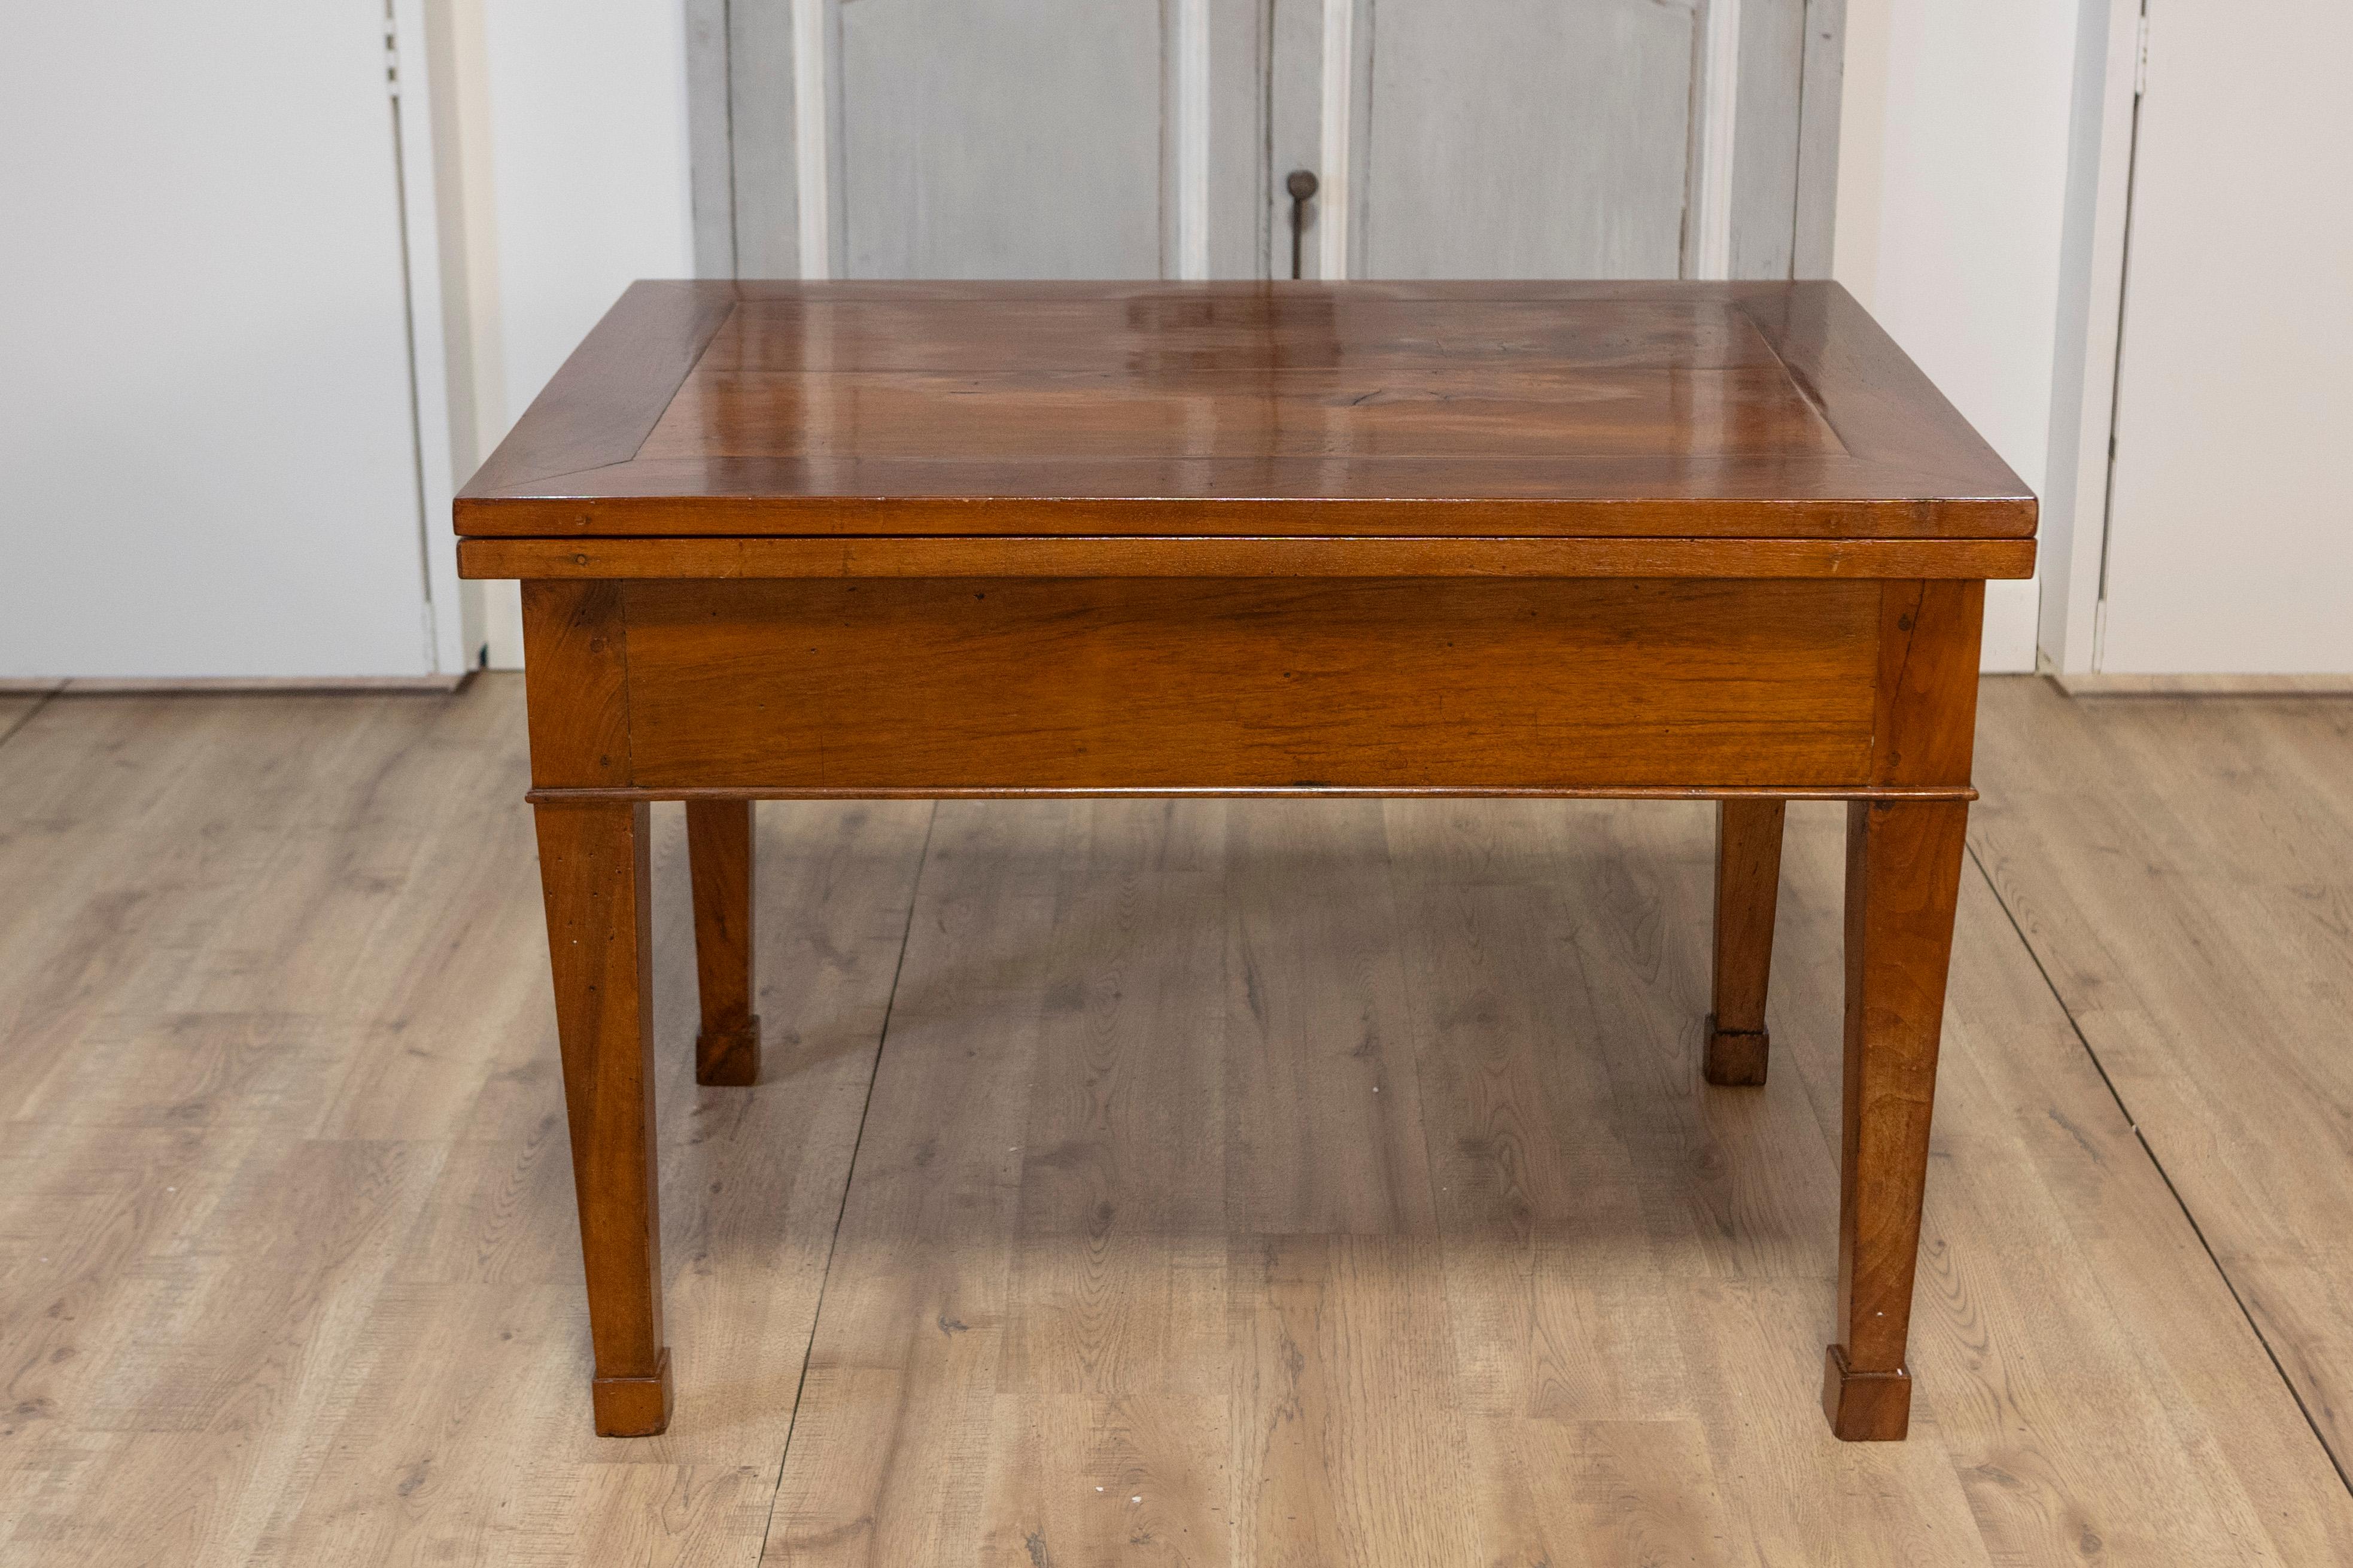 Italian Early 19th Century Walnut Folding Table with Tapered Legs In Good Condition For Sale In Atlanta, GA